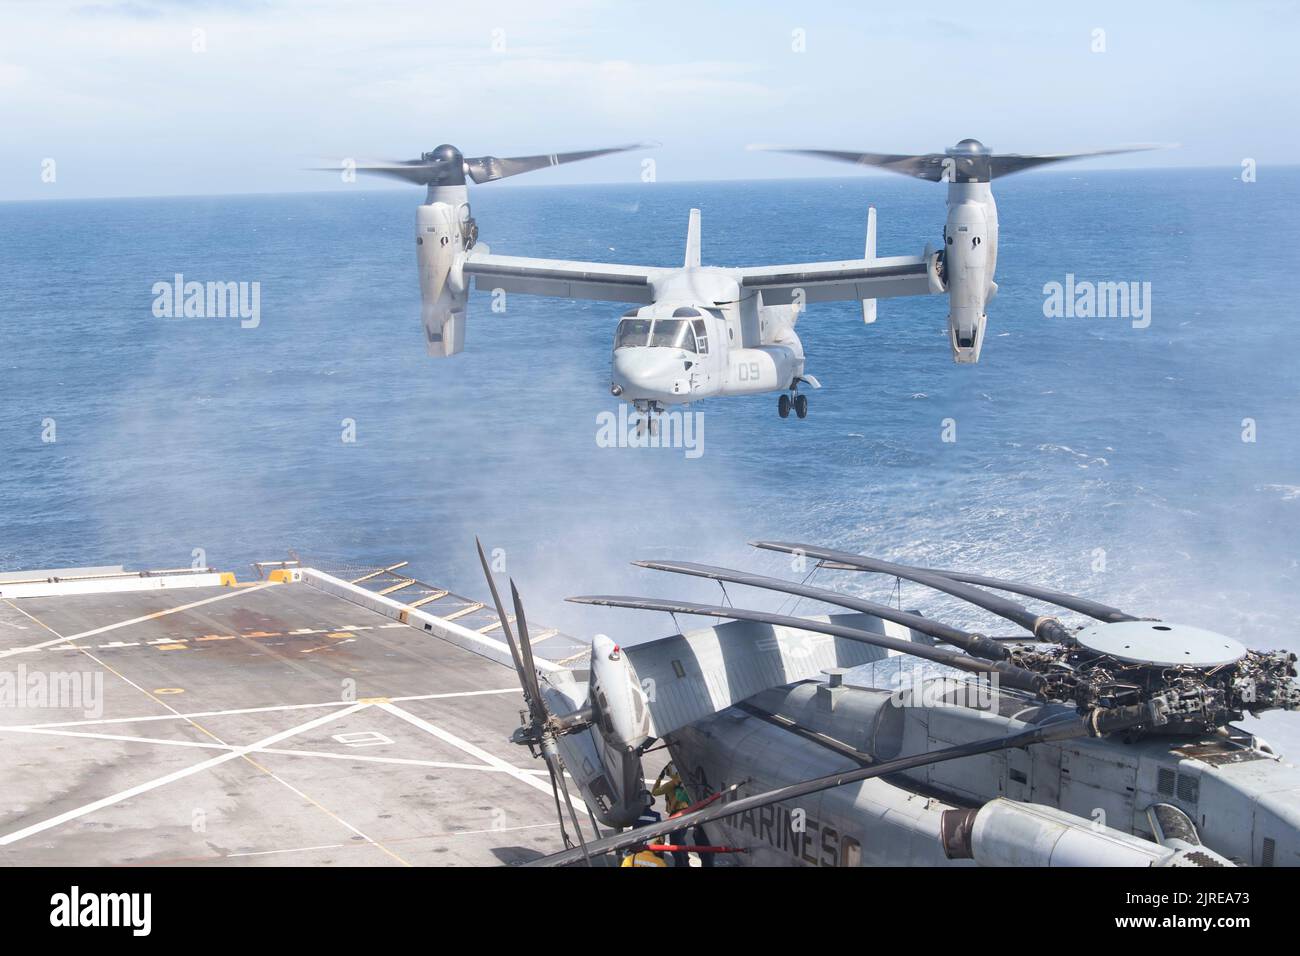 220808-N-FO865-2034    PACIFIC OCEAN (Aug 8, 2022) – An MV-22 Osprey, assigned to Marine Medium Tiltrotor Squadron (VMM) 362 (Reinforced), 13th Marine Expeditionary Unit (MEU), lands on the flight deck of amphibious transport dock ship USS John P. Murtha (LPD 26), August 8. Synchronizing the complementary capabilities of the 13th MEU and USS John P Murtha multiplies the traditional influence of sea power to produce a more competitive and lethal force. John P. Murtha, part of amphibious squadron (CPR) SEVEN, along with 13th Marine Expeditionary Unit (MEU), is currently underway conducting integ Stock Photo